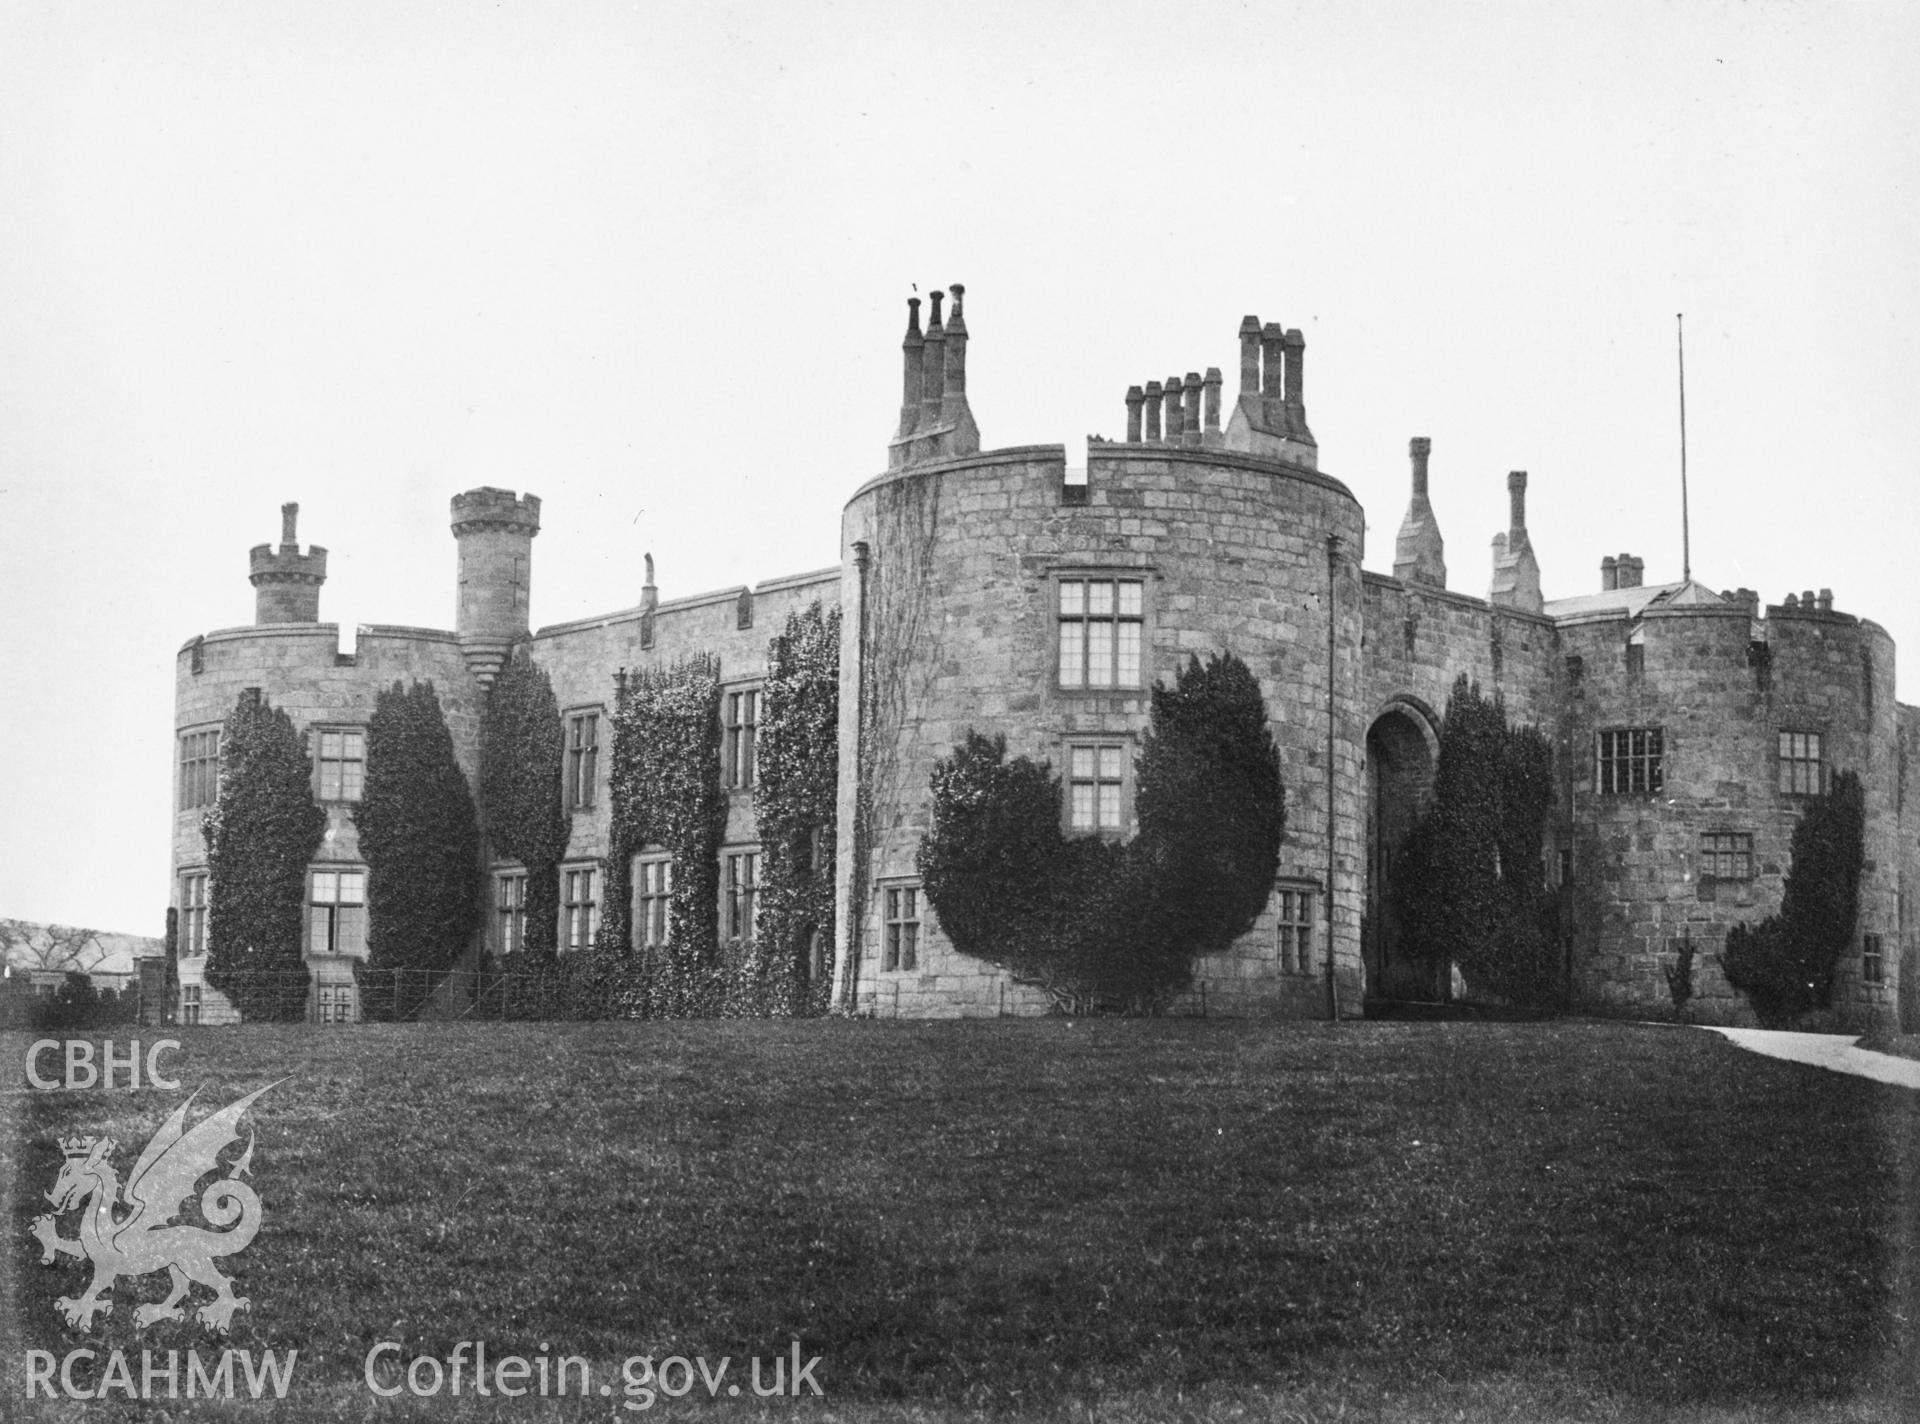 Digital copy of a view of Chirk Castle.